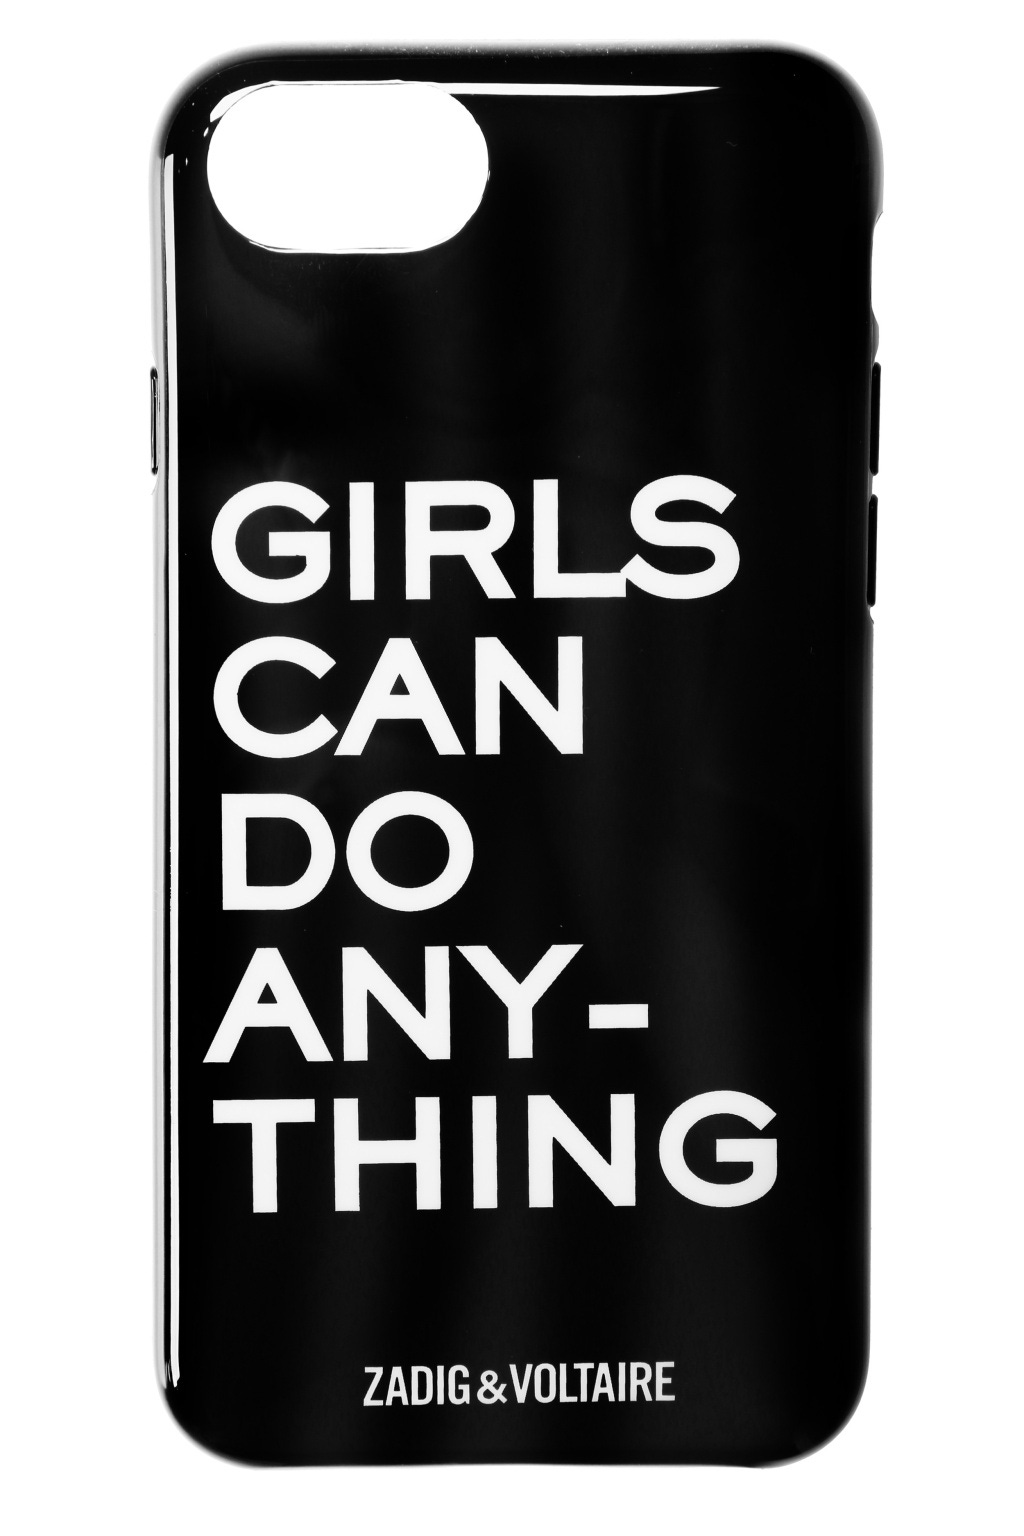 Black Iphone 8 case Zadig & Voltaire  reading "Girls Can Do Any-thing"